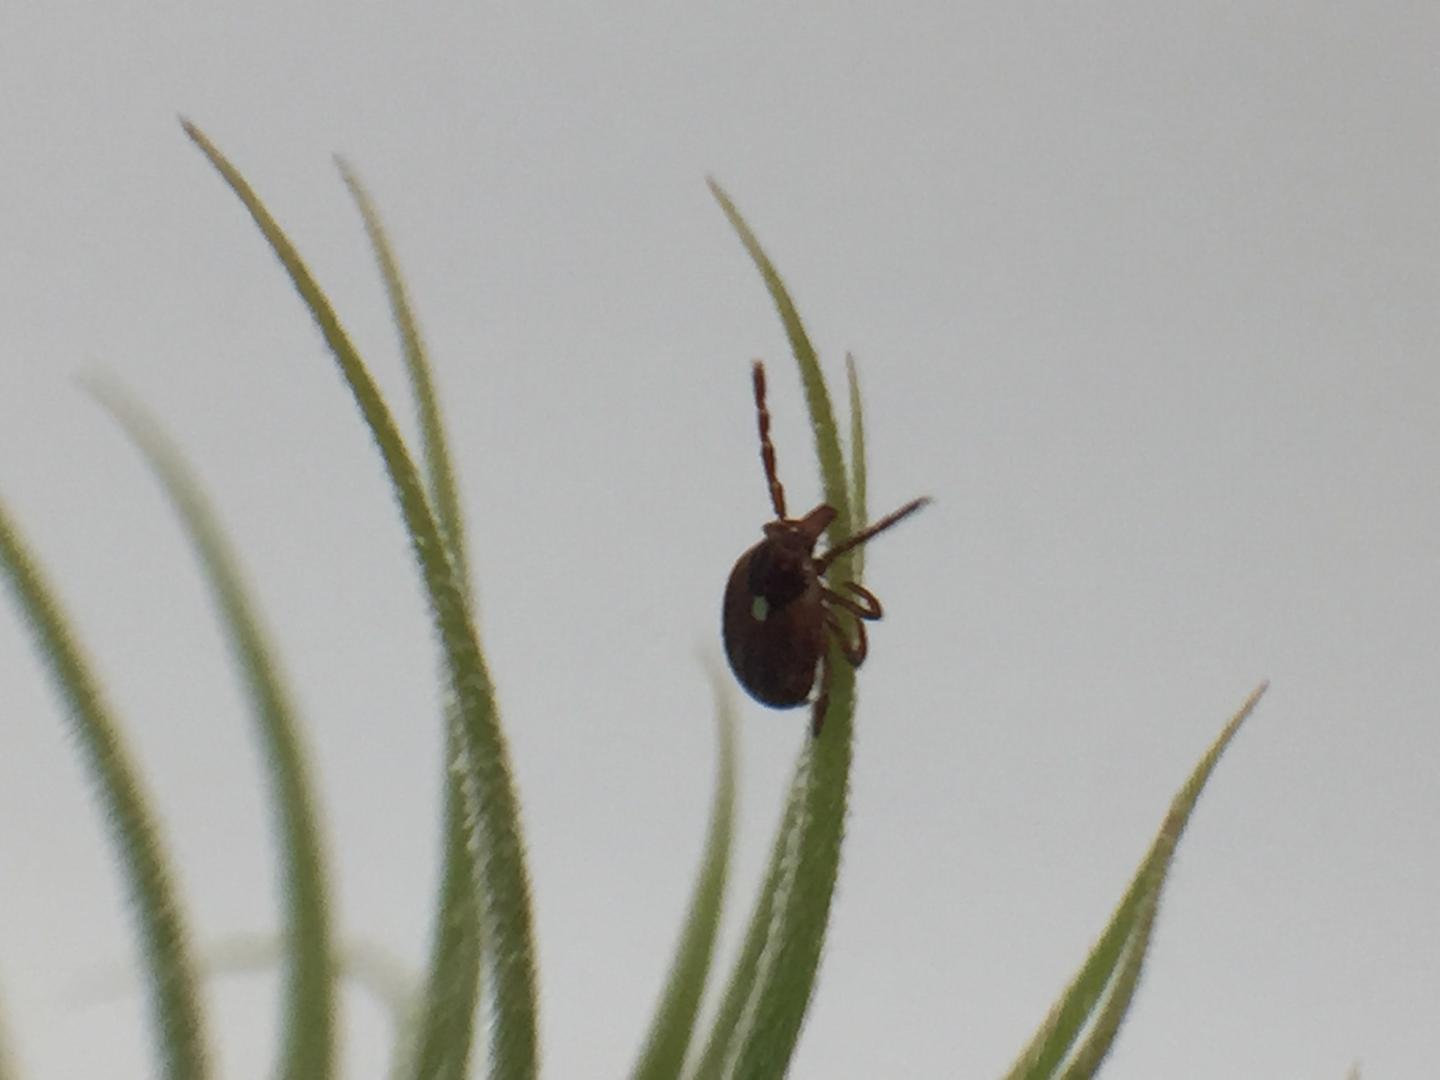 An Adult Female Lone Star Tick Climbs On A Plant